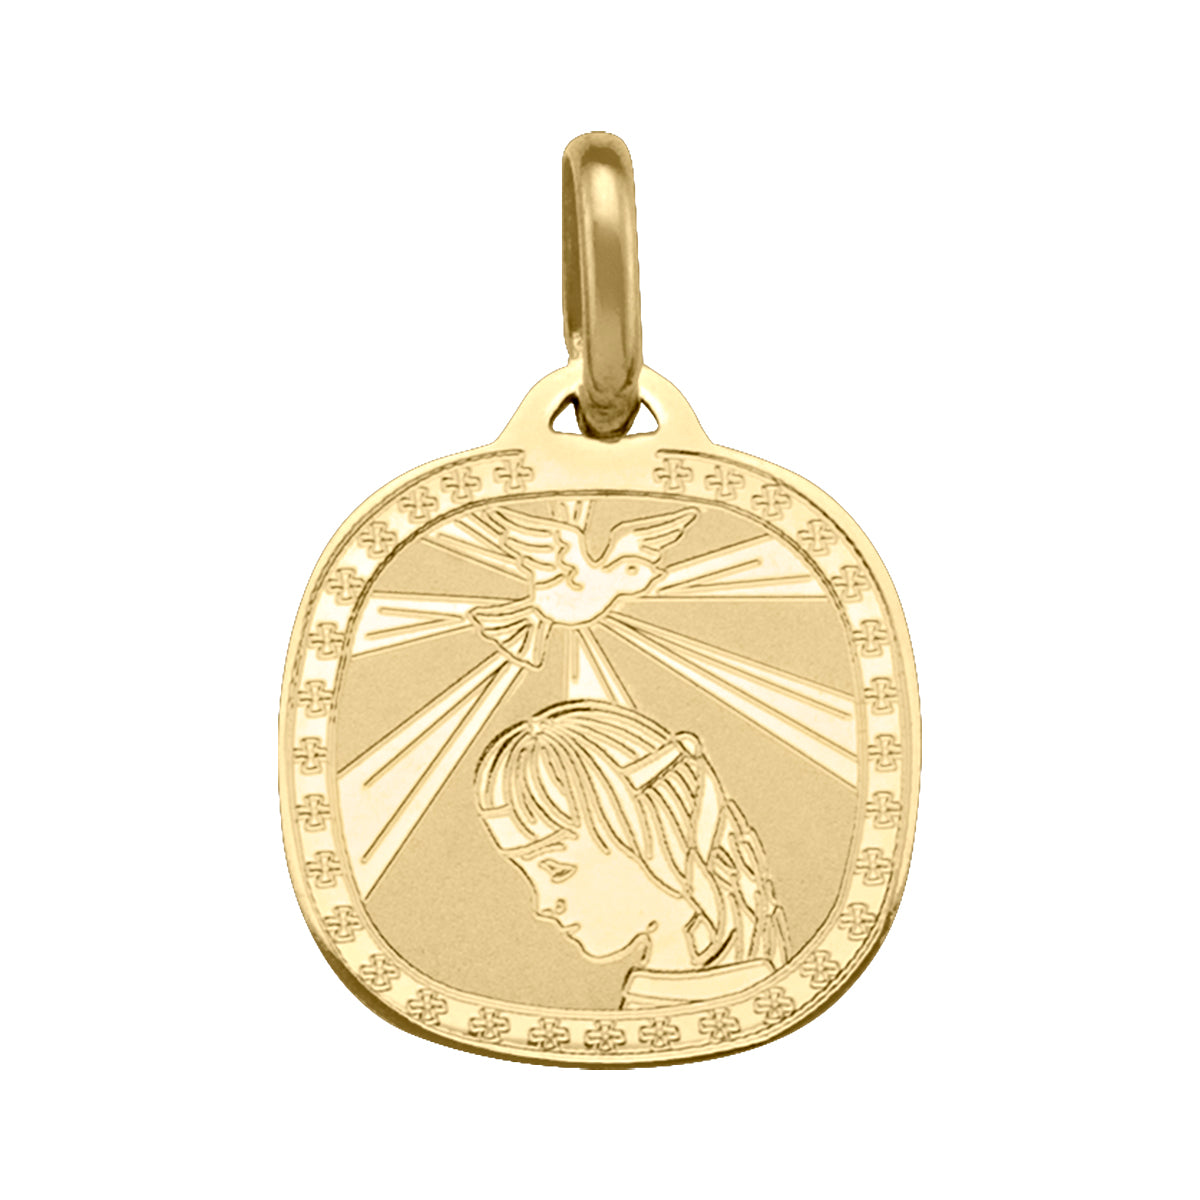 CONFIRMATION MEDAL YELLOW GOLD SOLID